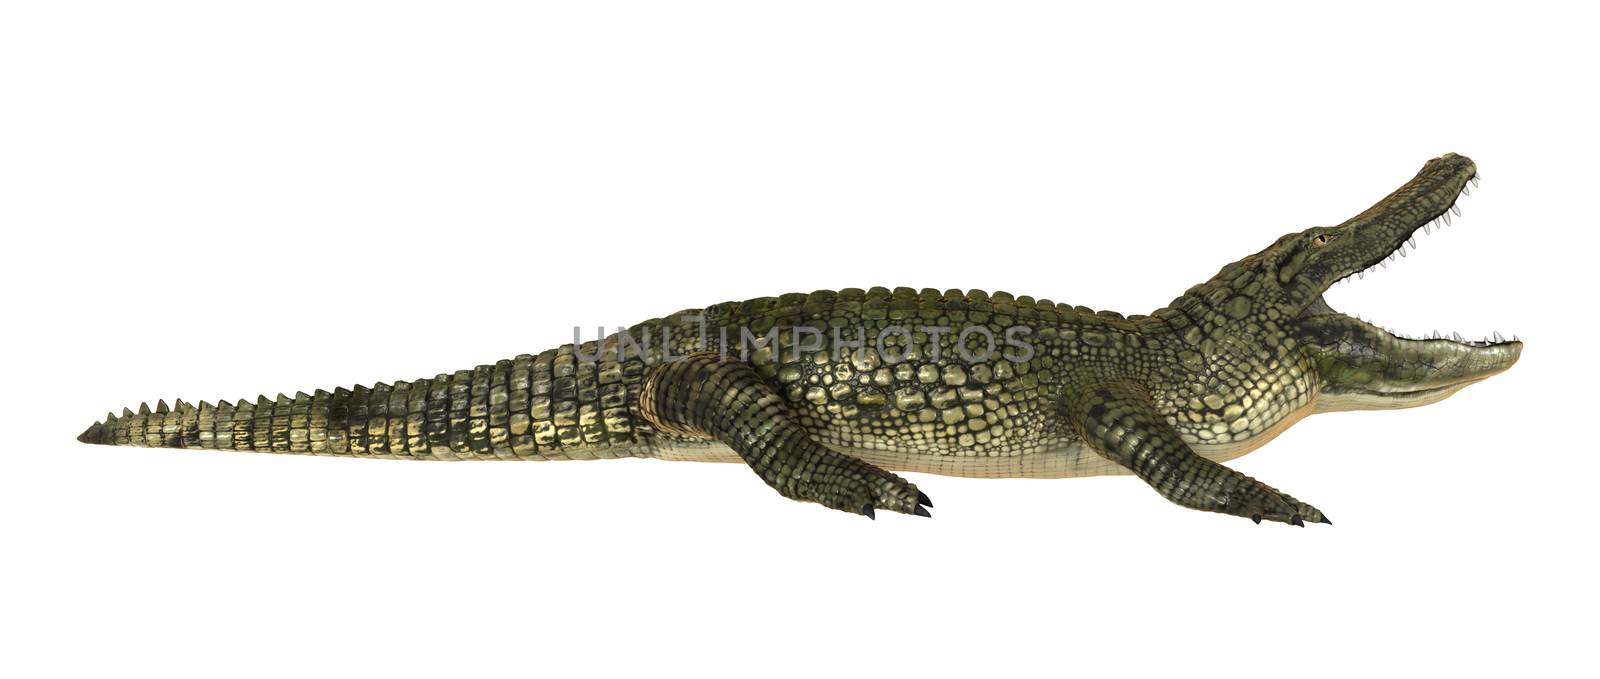 3D digital render of a American alligator isolated on white background